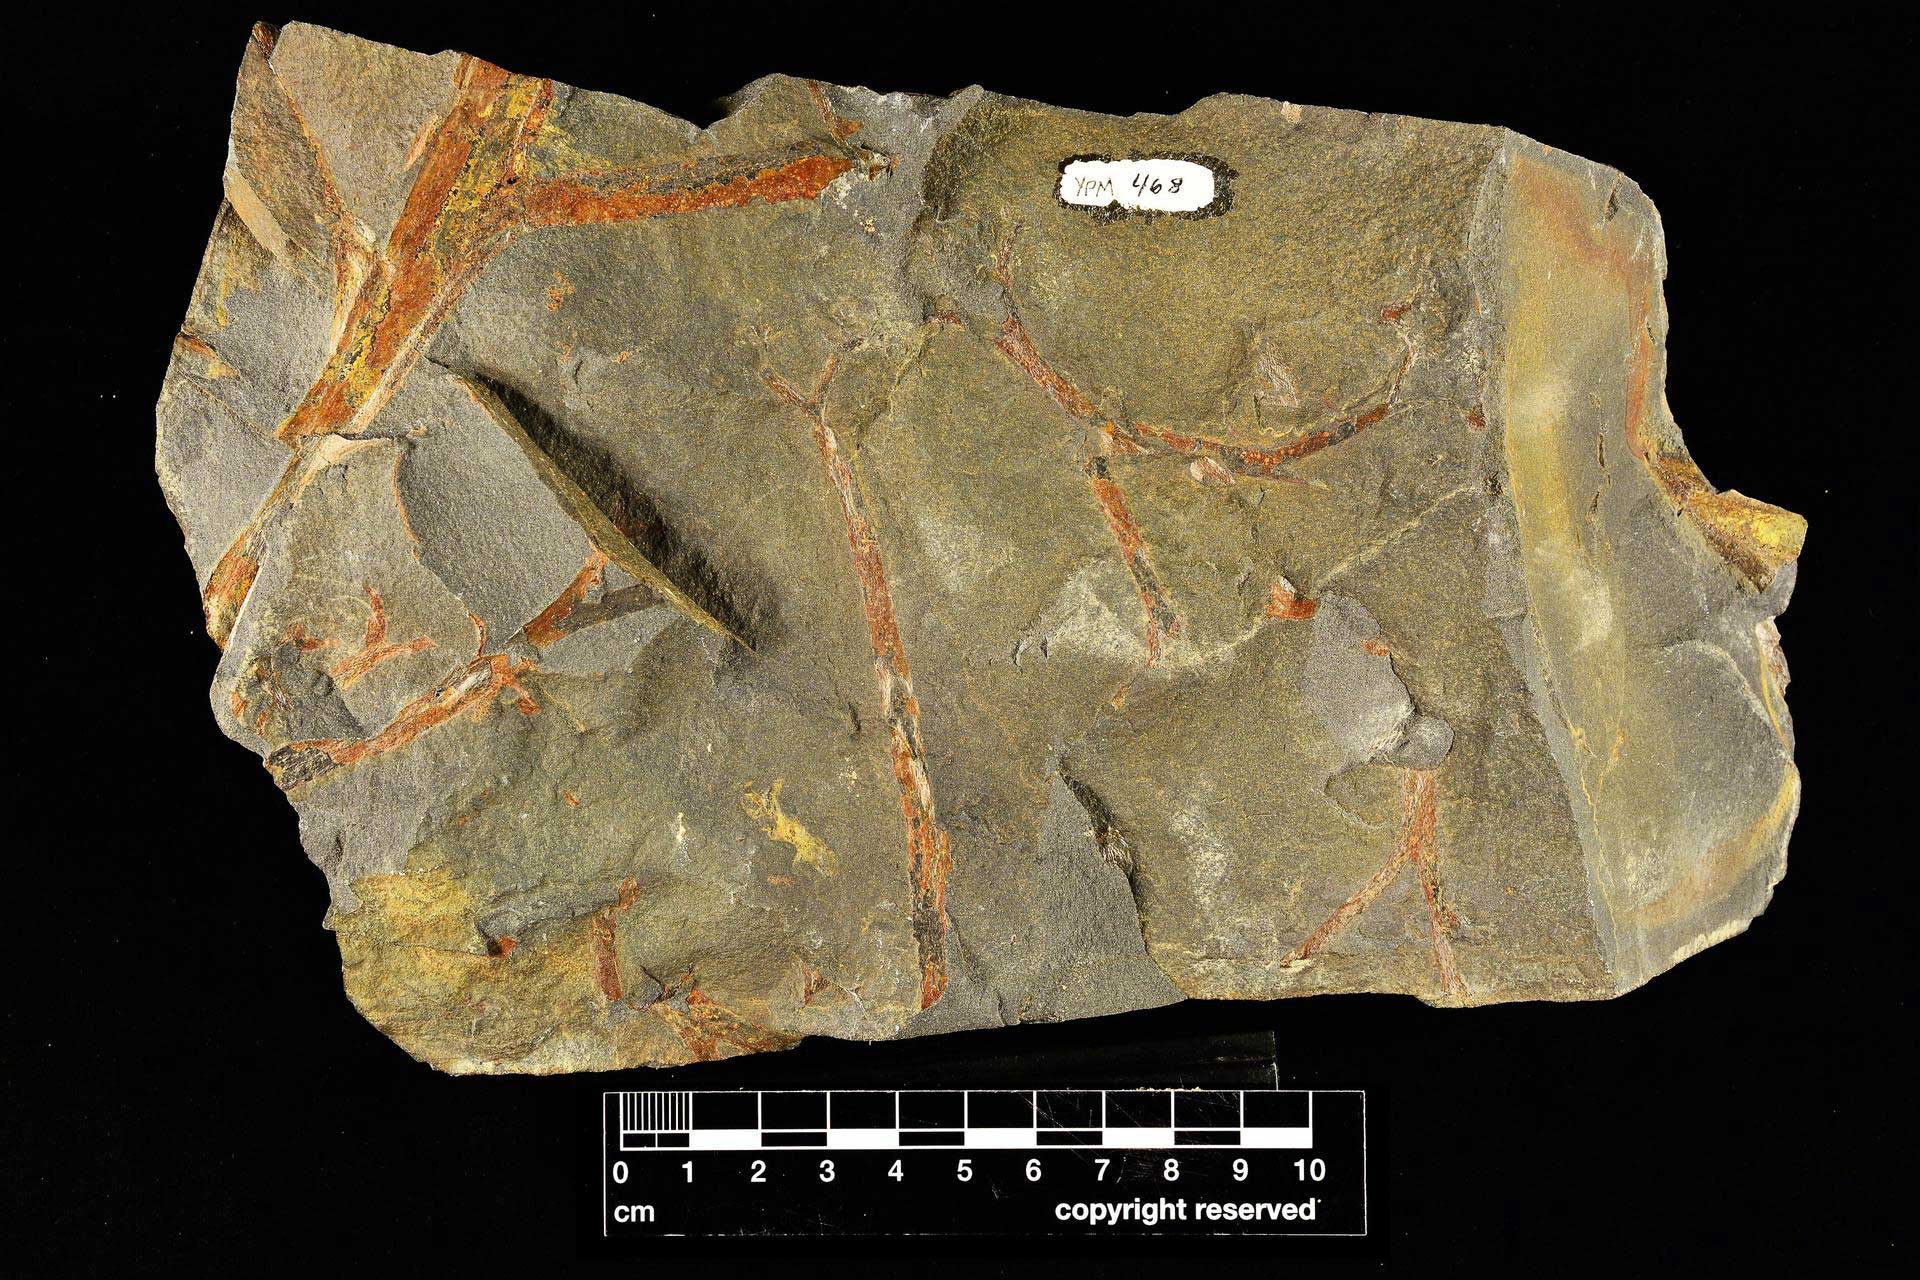 Photograph of a specimen of the early vascular plant Pertica quadrifaria from the Devonian of Maine. The photo shows orange-colored branches preserved on the face of a brown rock. A scale bar at the bottom of the image is 10 centimeters long; the rock is probably about 20 centimeters across.